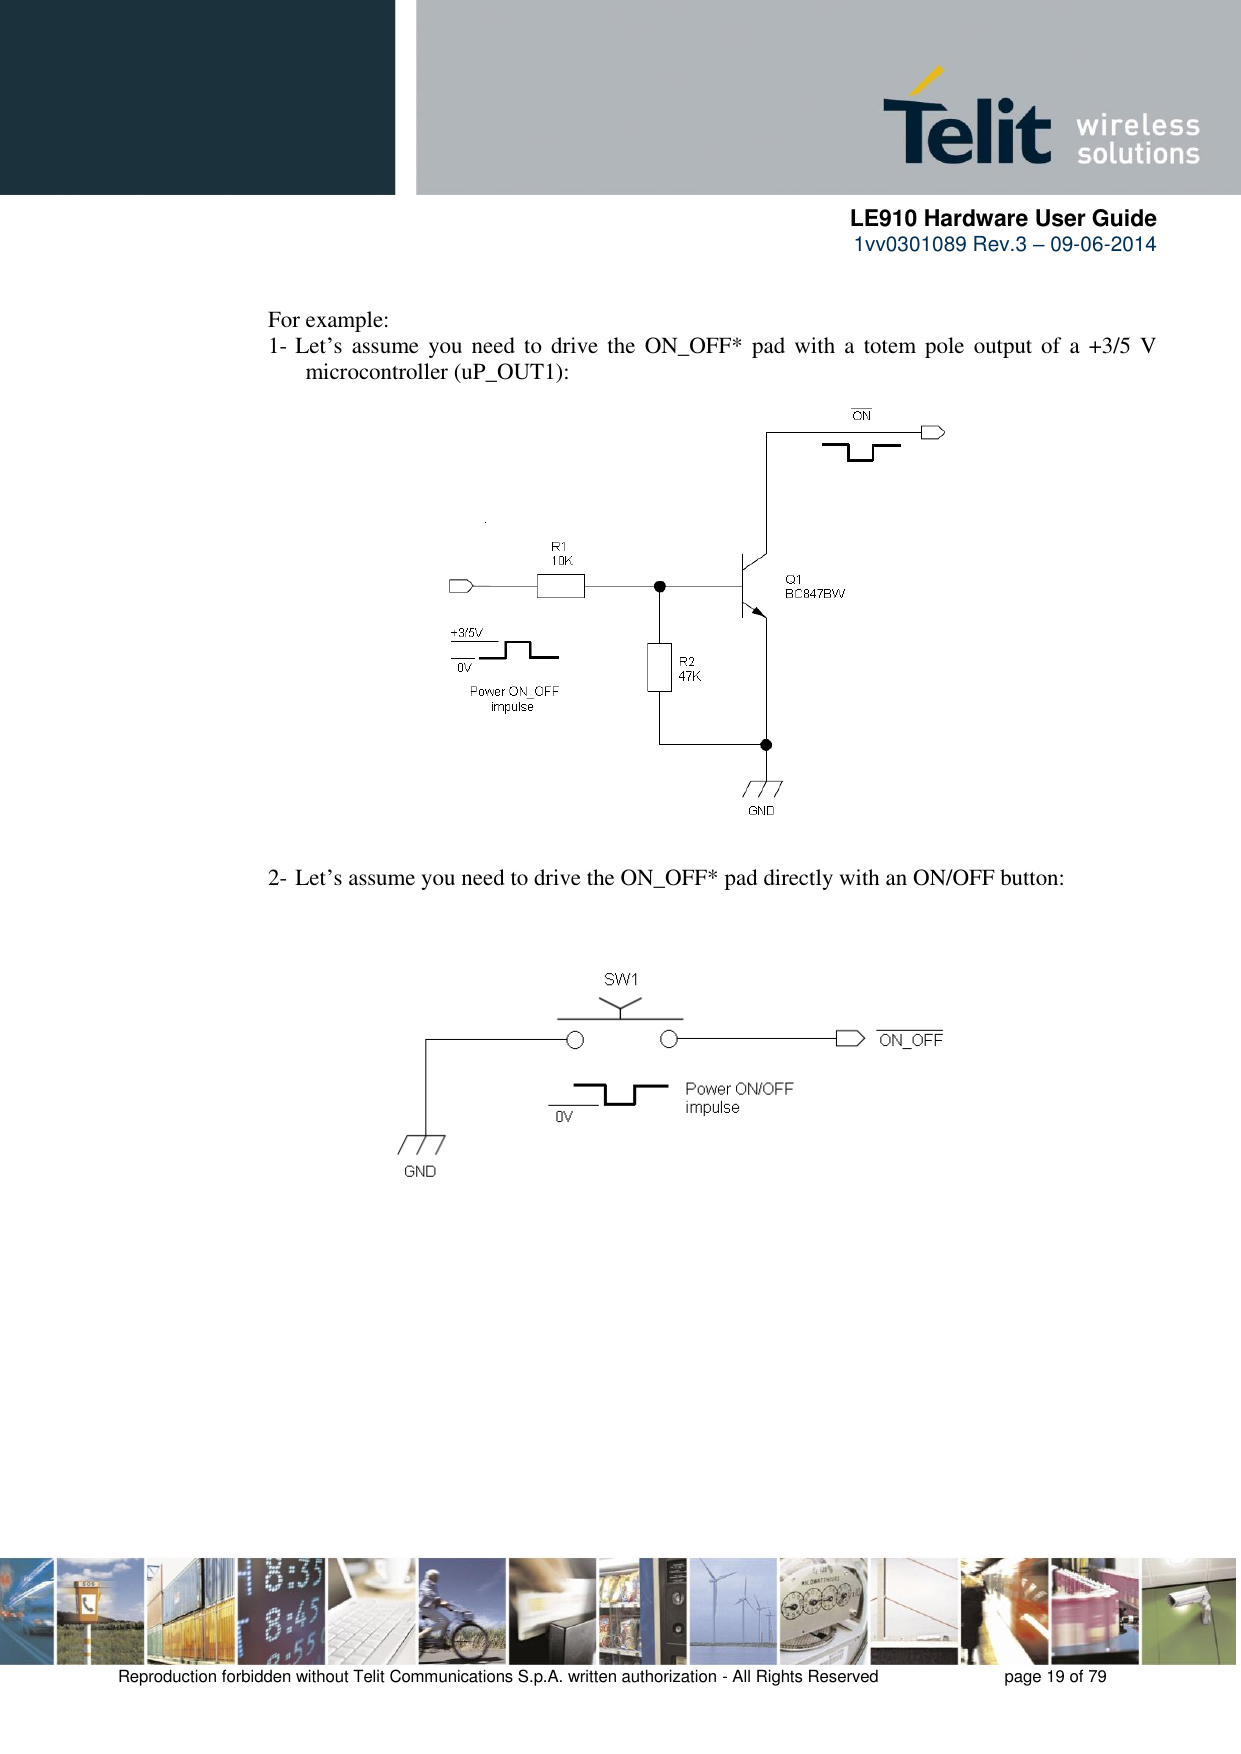      LE910 Hardware User Guide 1vv0301089 Rev.3 – 09-06-2014    Reproduction forbidden without Telit Communications S.p.A. written authorization - All Rights Reserved    page 19 of 79   For example: 1- Let’s assume you need  to drive  the  ON_OFF*  pad with  a  totem pole output of  a  +3/5  V microcontroller (uP_OUT1):                 2- Let’s assume you need to drive the ON_OFF* pad directly with an ON/OFF button: 